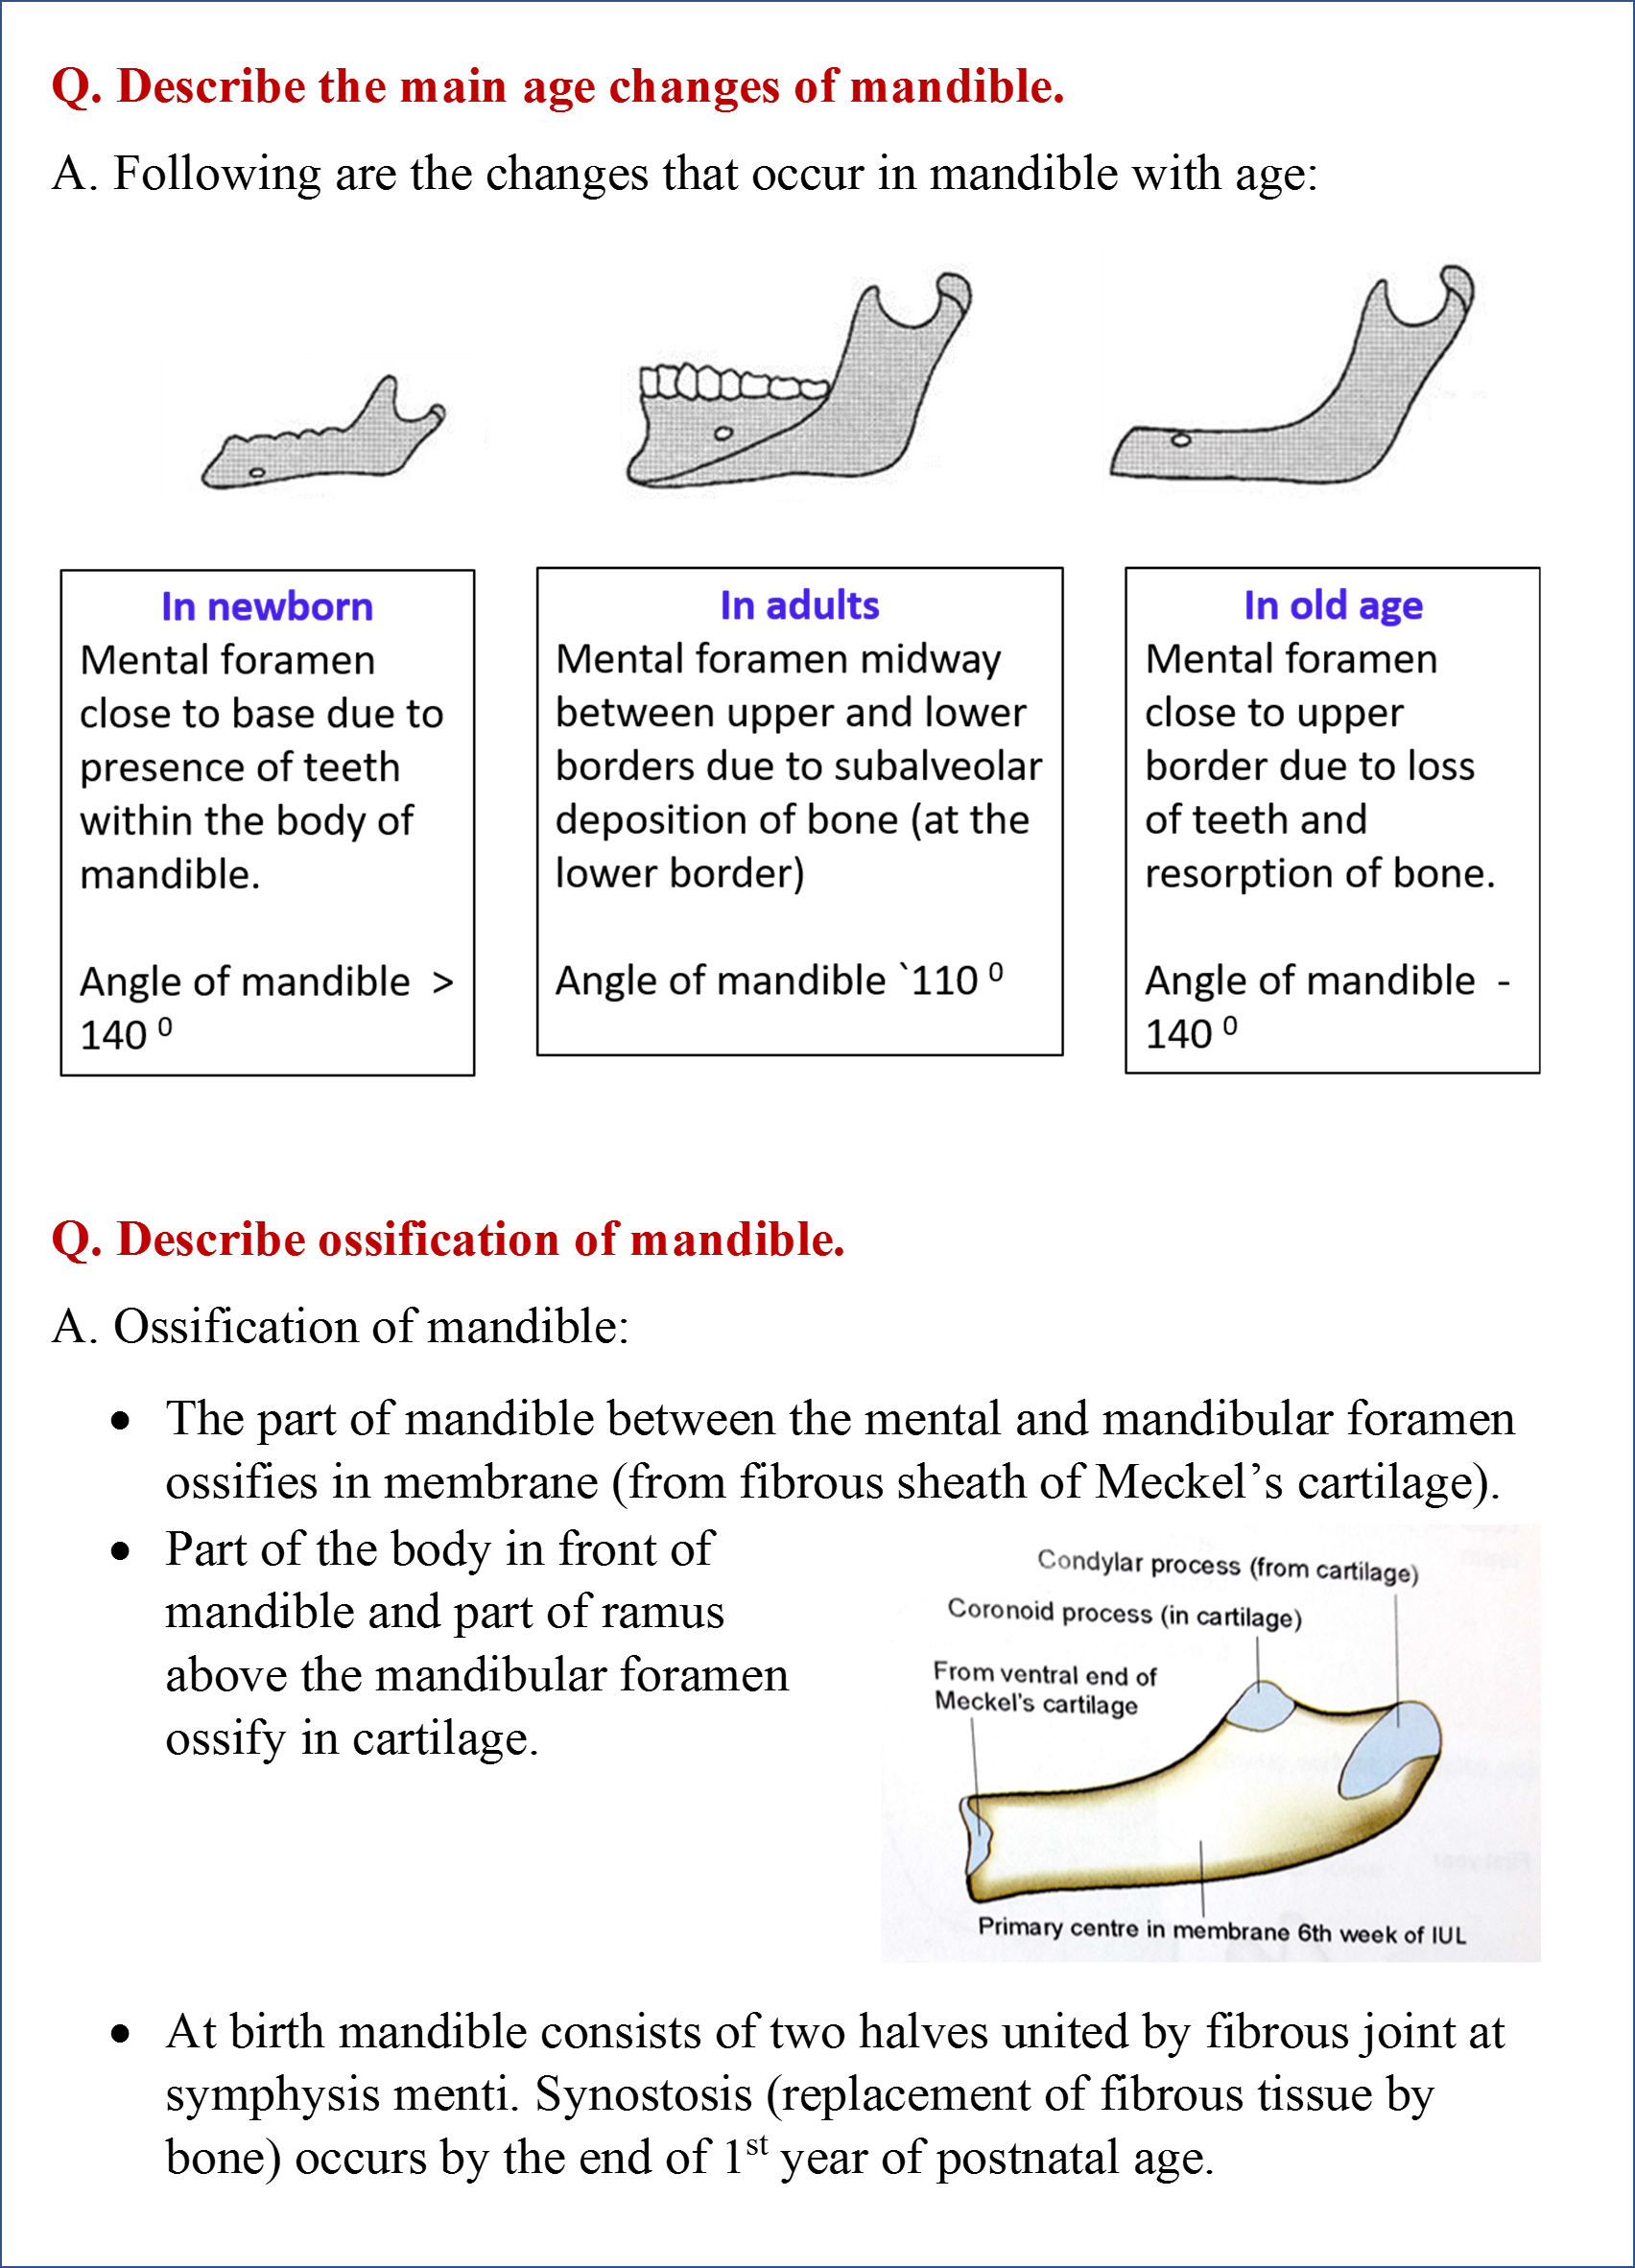 Age changes and ossification of mandible